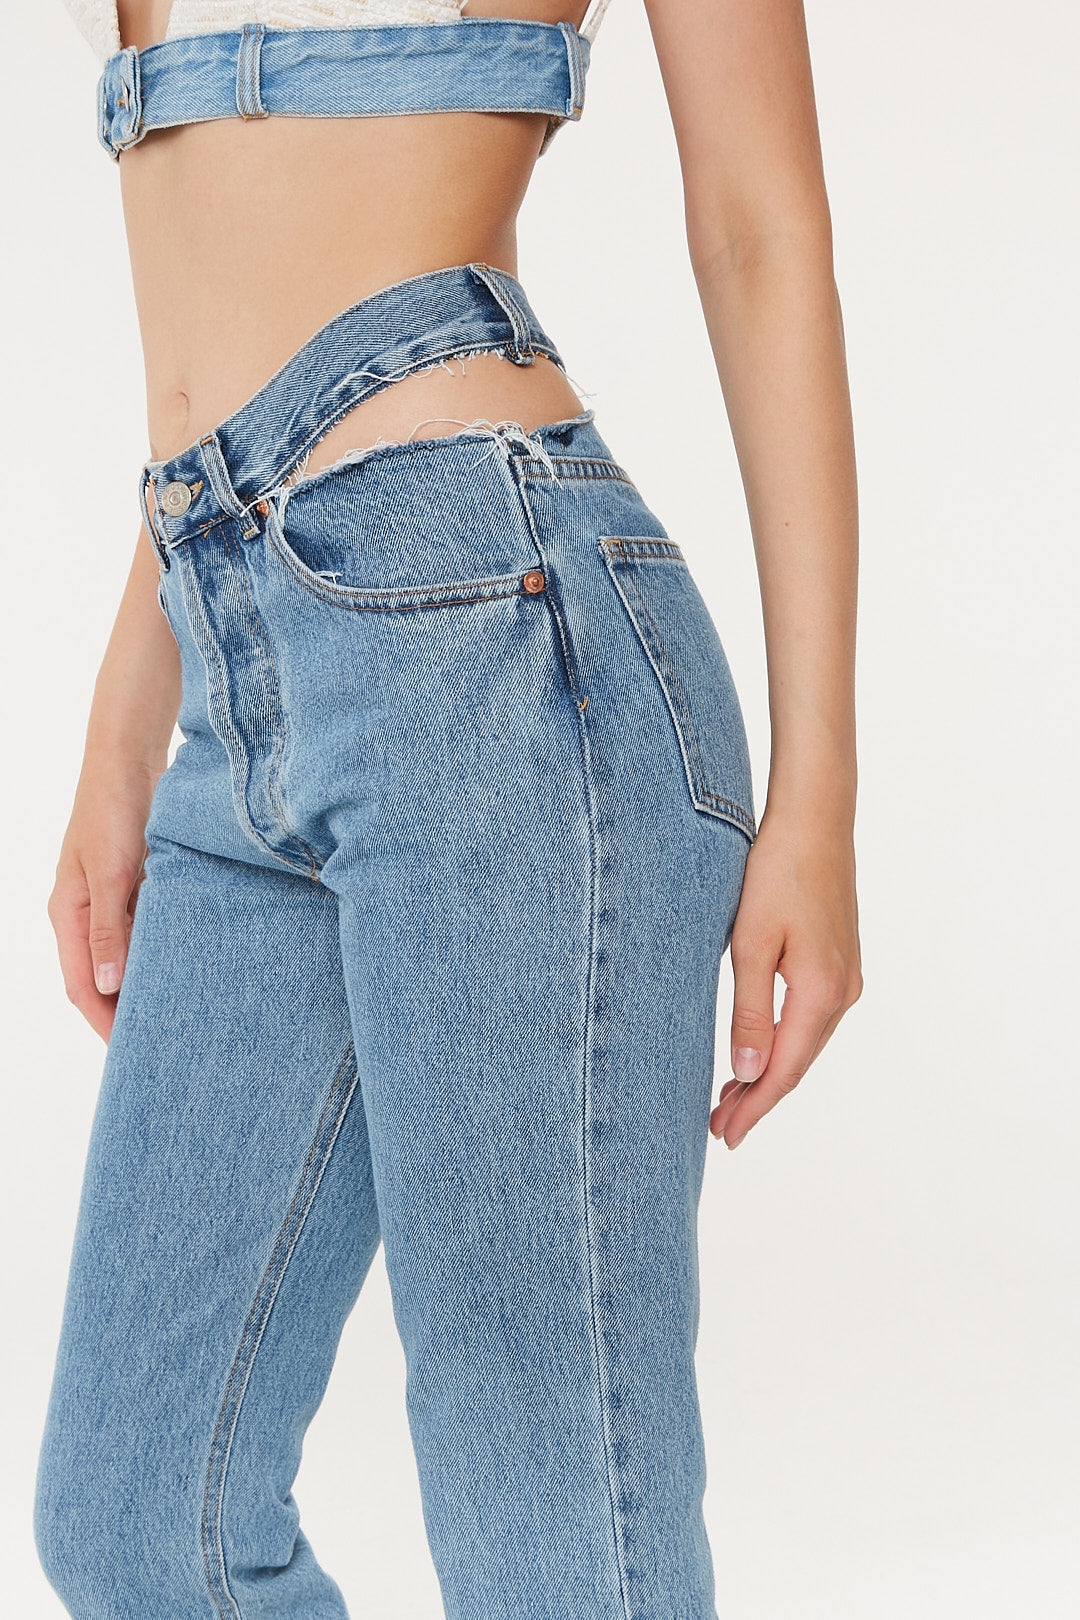 Straight Cut Out Jeans